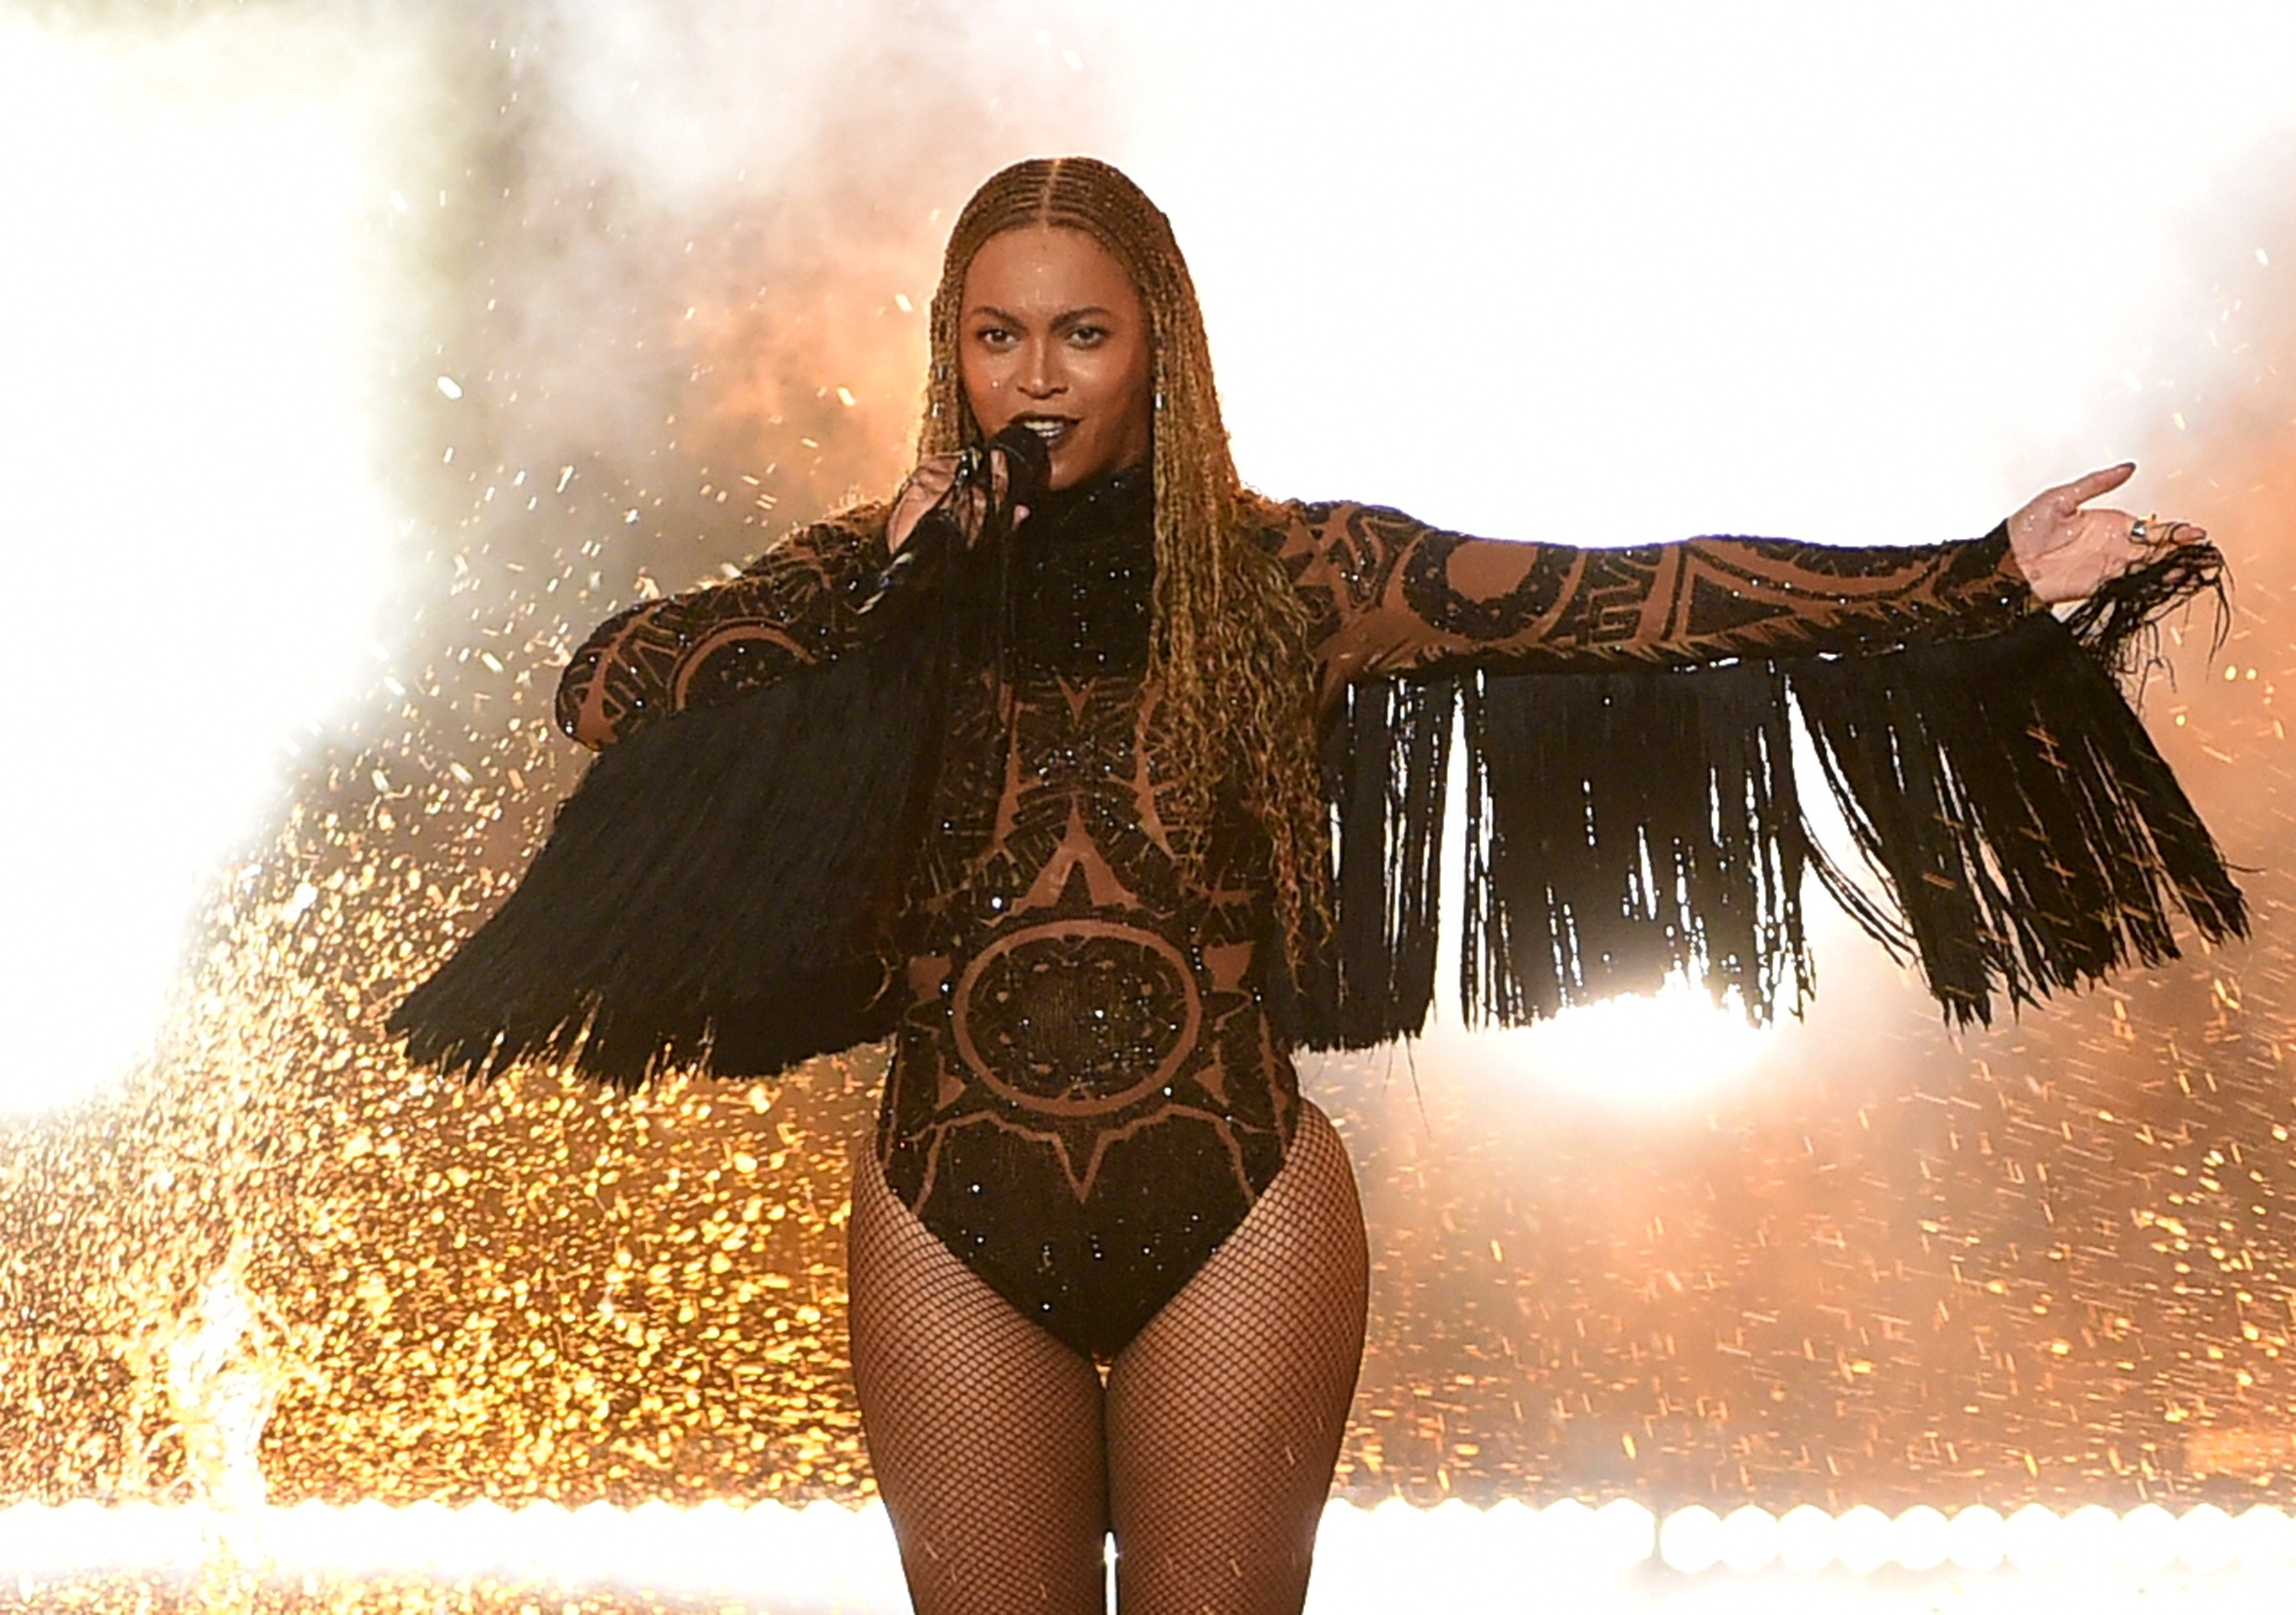 LOS ANGELES, CA - JUNE 26:  Recording artist Beyonce performs onstage during the 2016 BET Awards at the Microsoft Theater on June 26, 2016 in Los Angeles, California.  (Photo by Kevin Winter/BET/Getty Images for BET) (Kevin Winter—Getty Images)